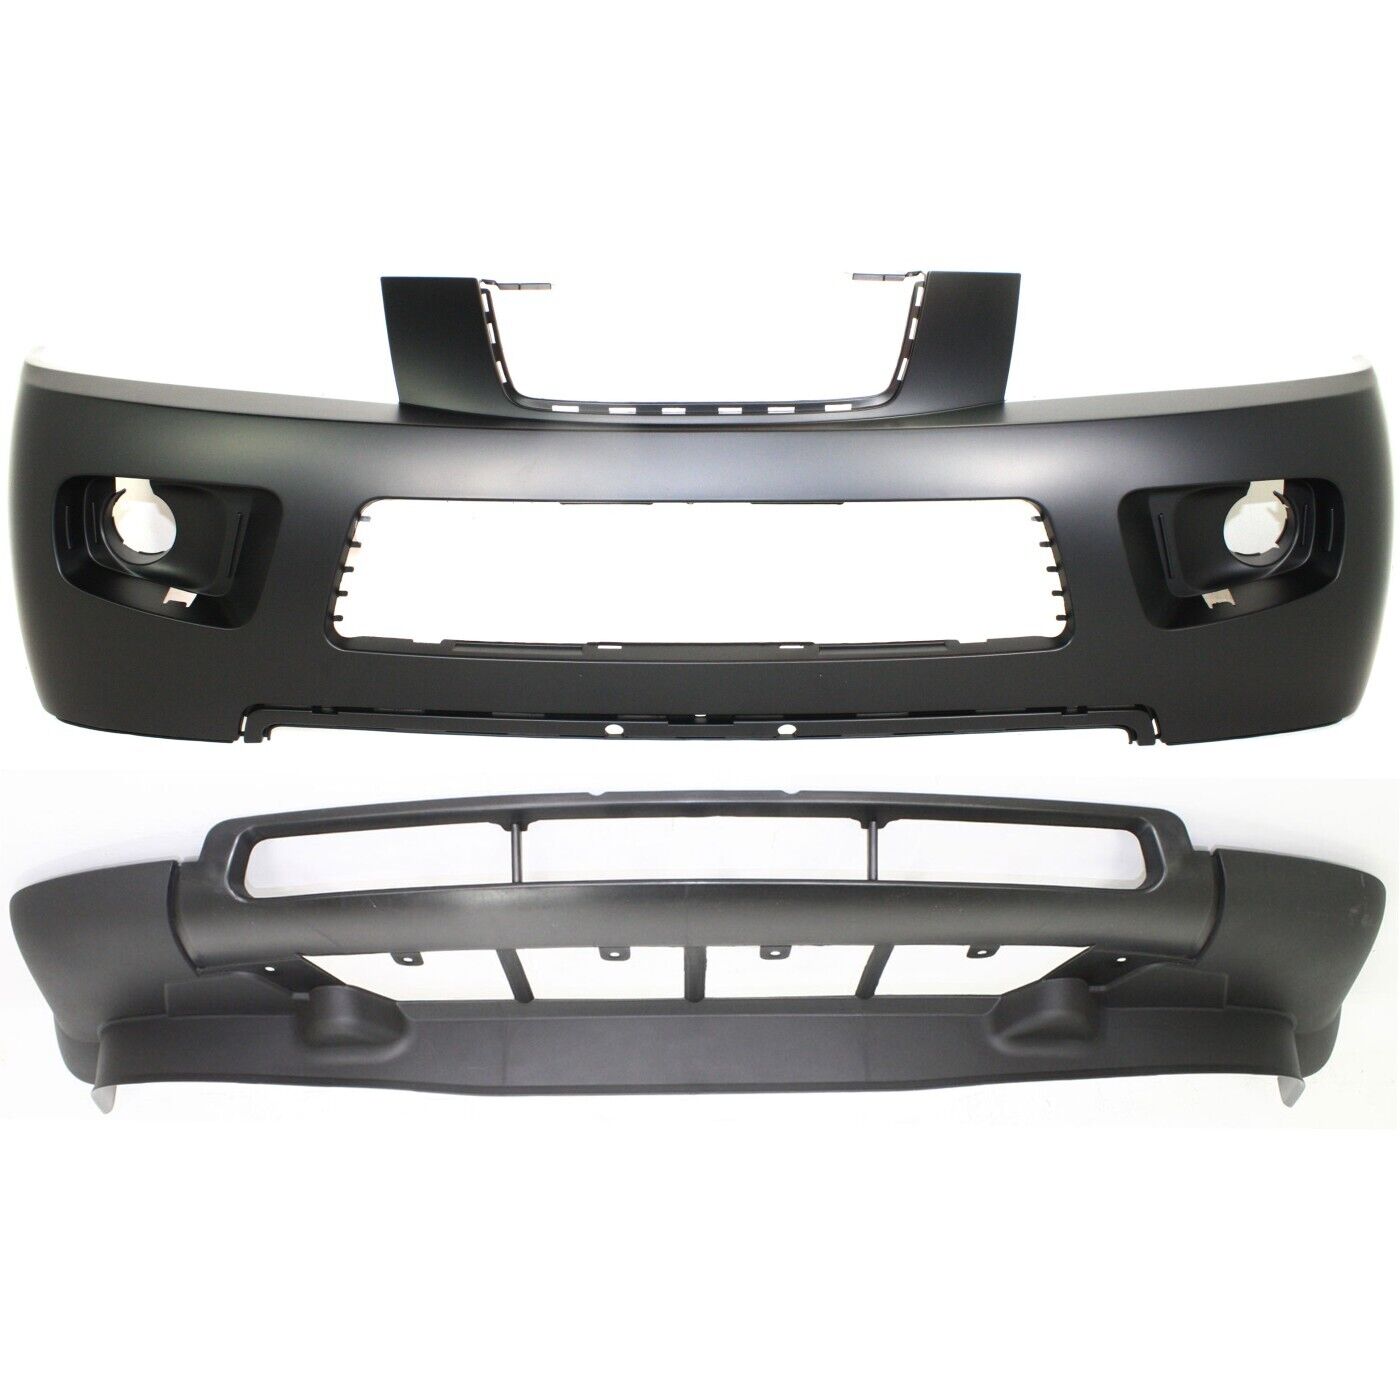 New Set of 2 Bumper Covers Fascias Front Upper for Vue GM1014100, GM1015101 Pair